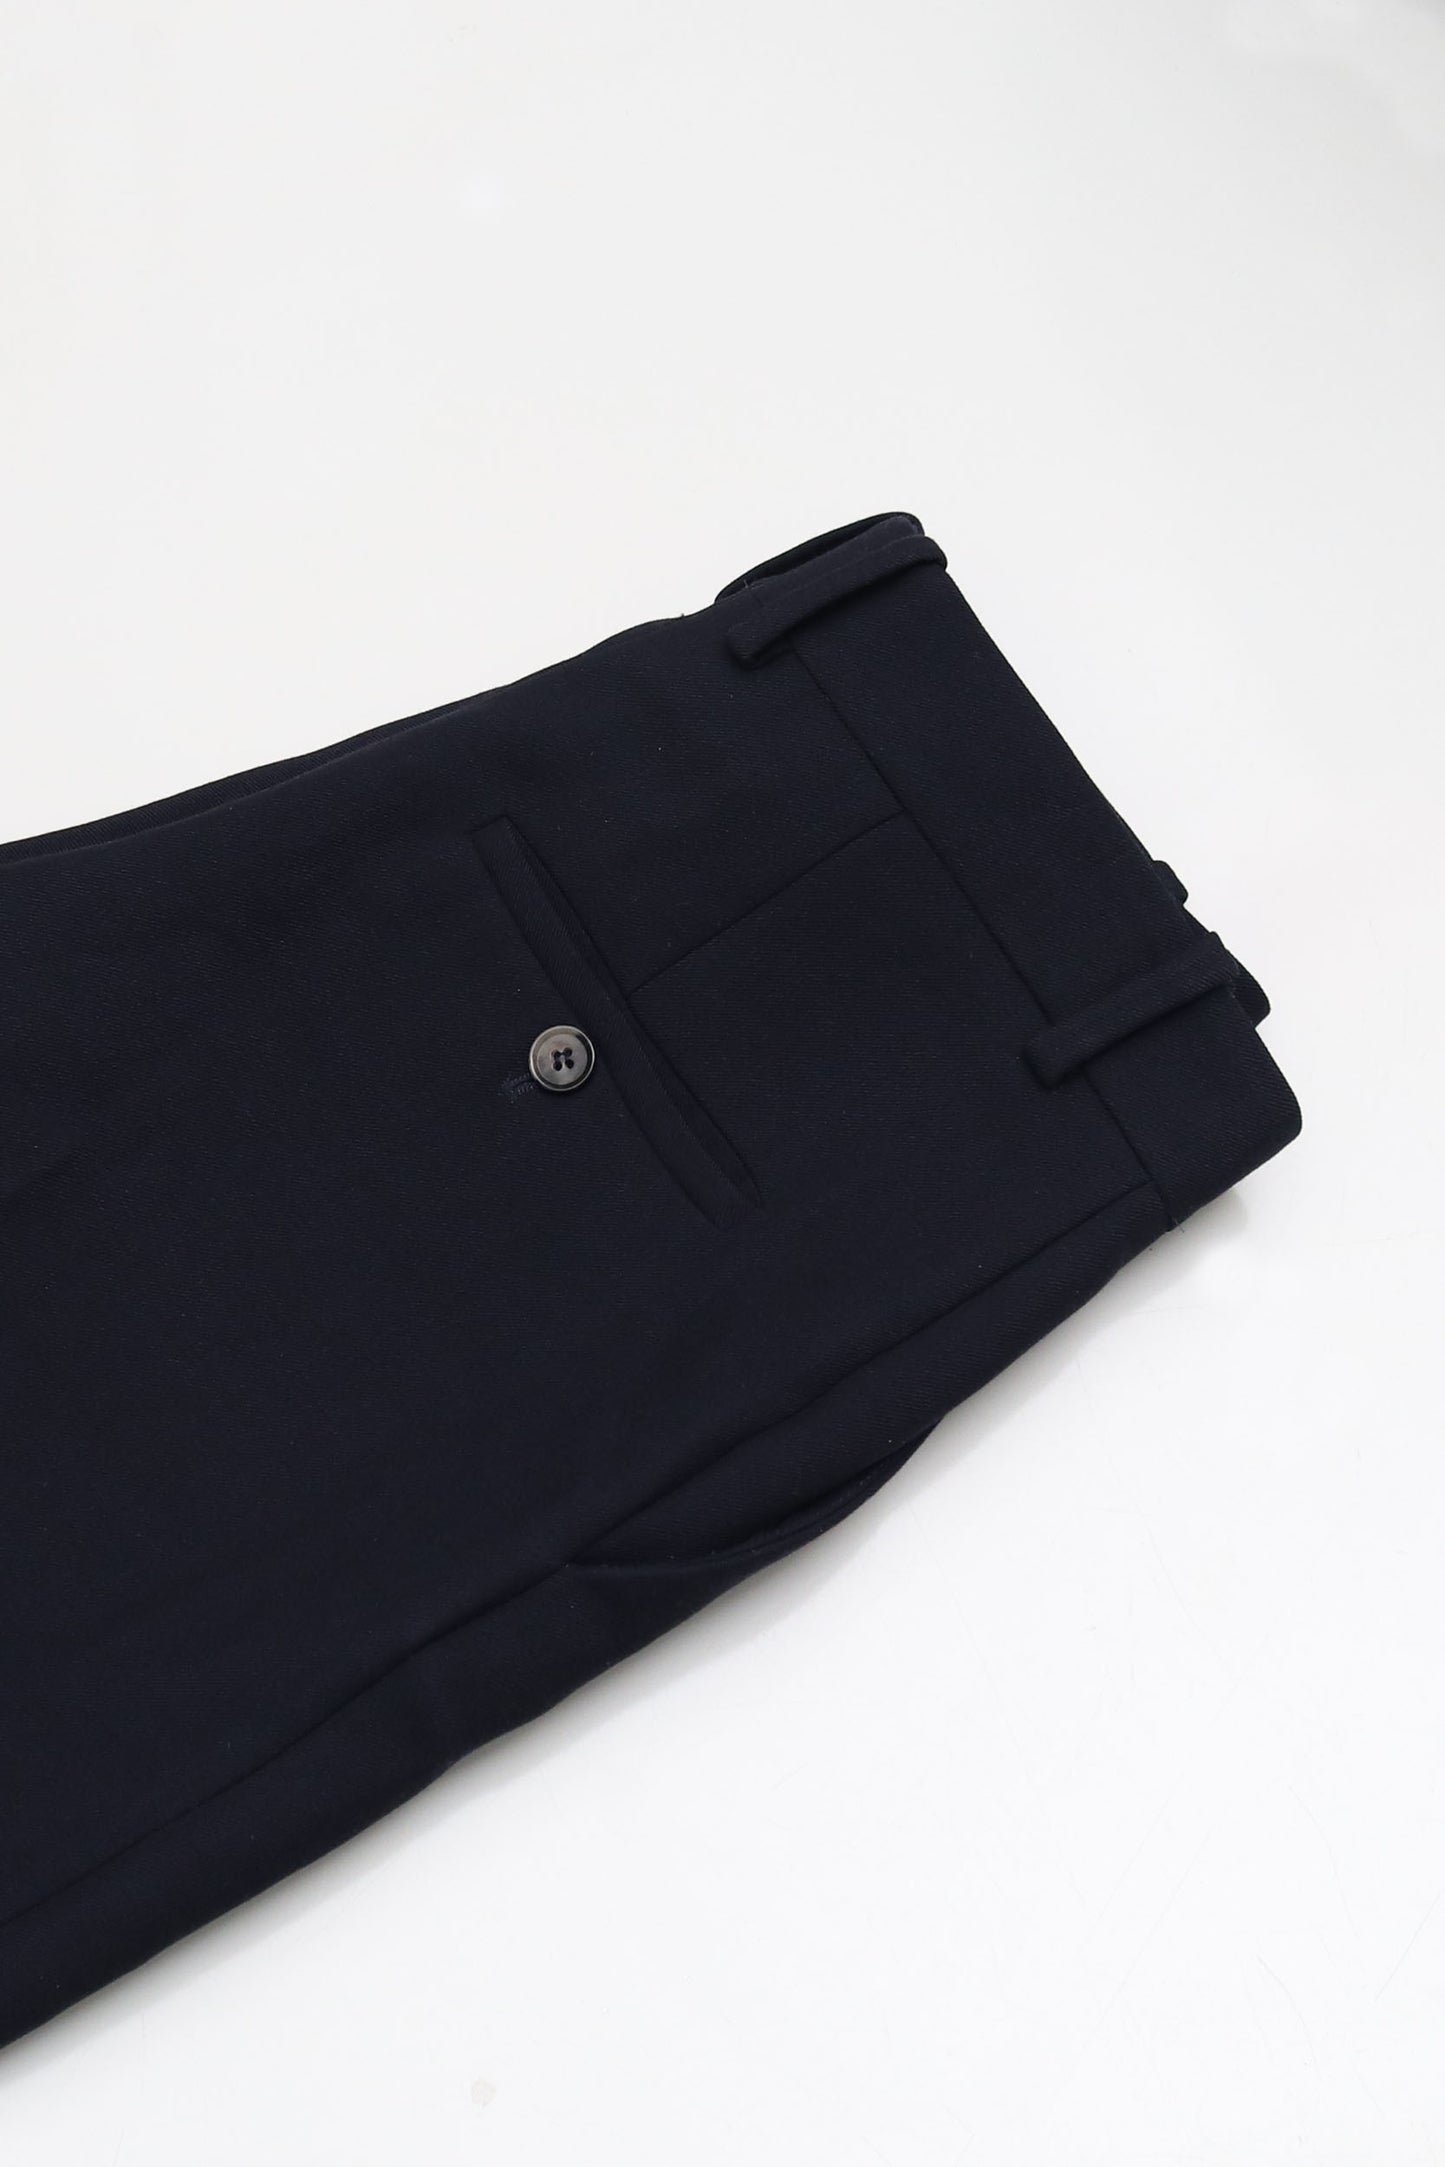 Cos Navy Wool-Blend Trousers